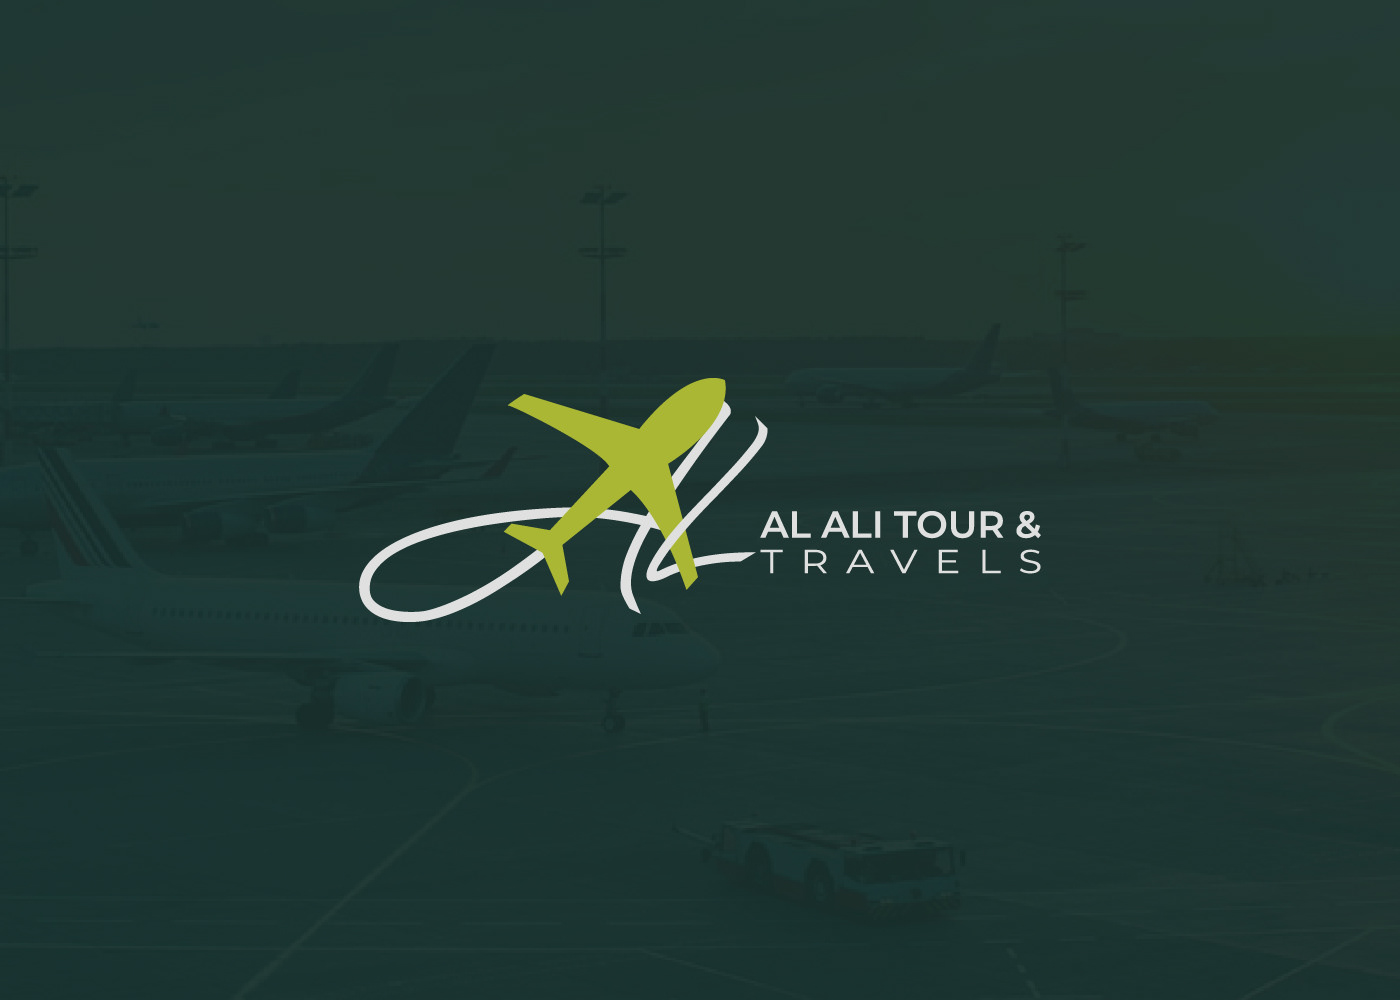 "Embark on Unforgettable Journeys with Al Ali Tour and Travels!